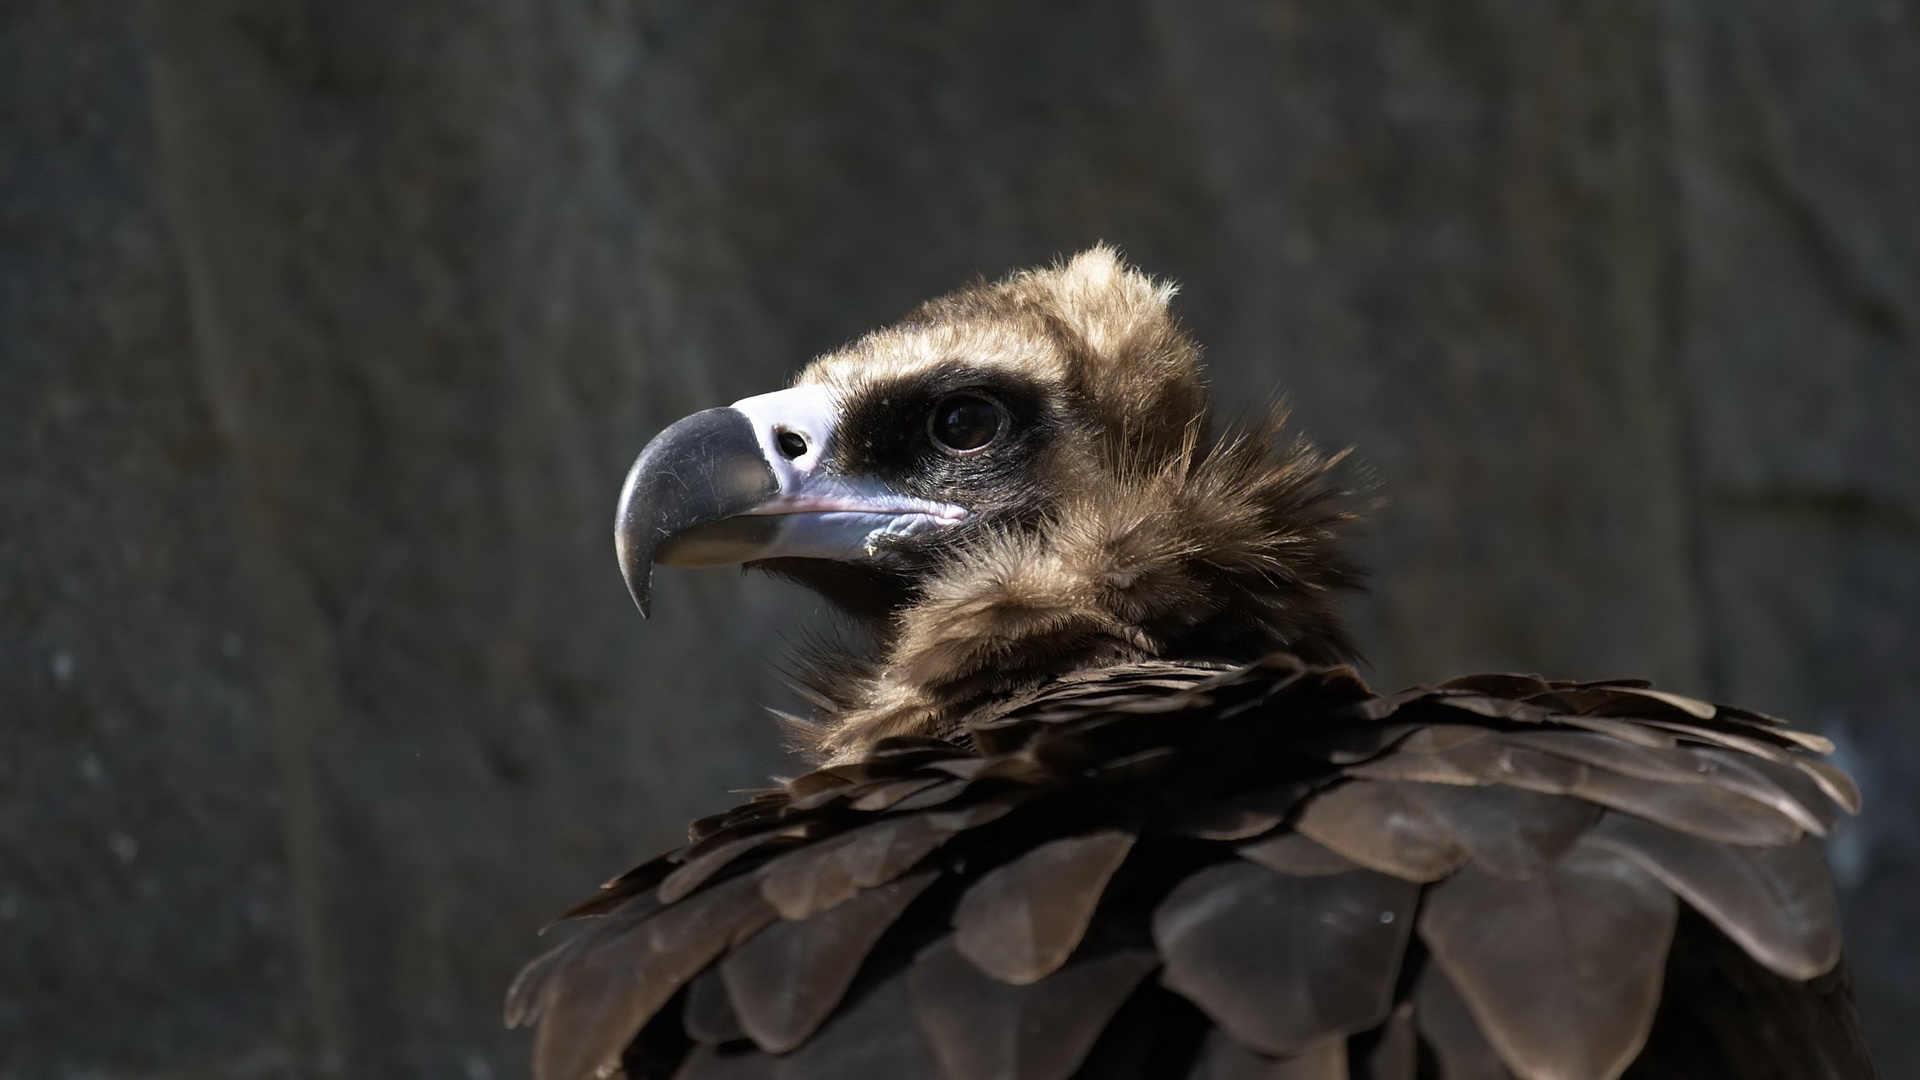  Vulture HD Android Wallpapers